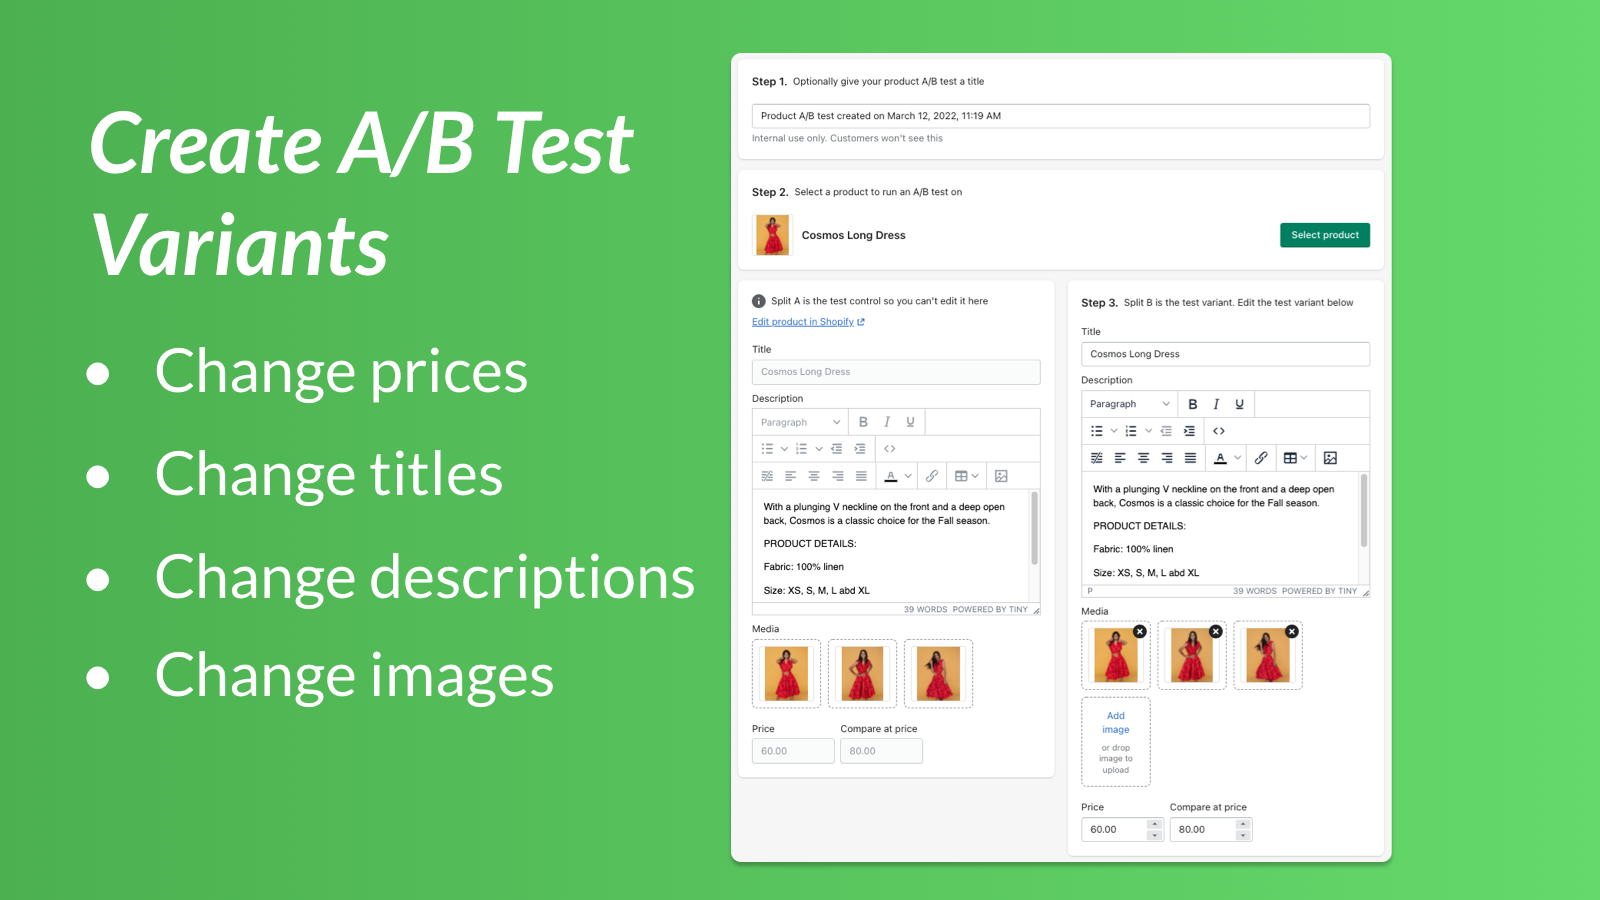 Create product A/B tests!